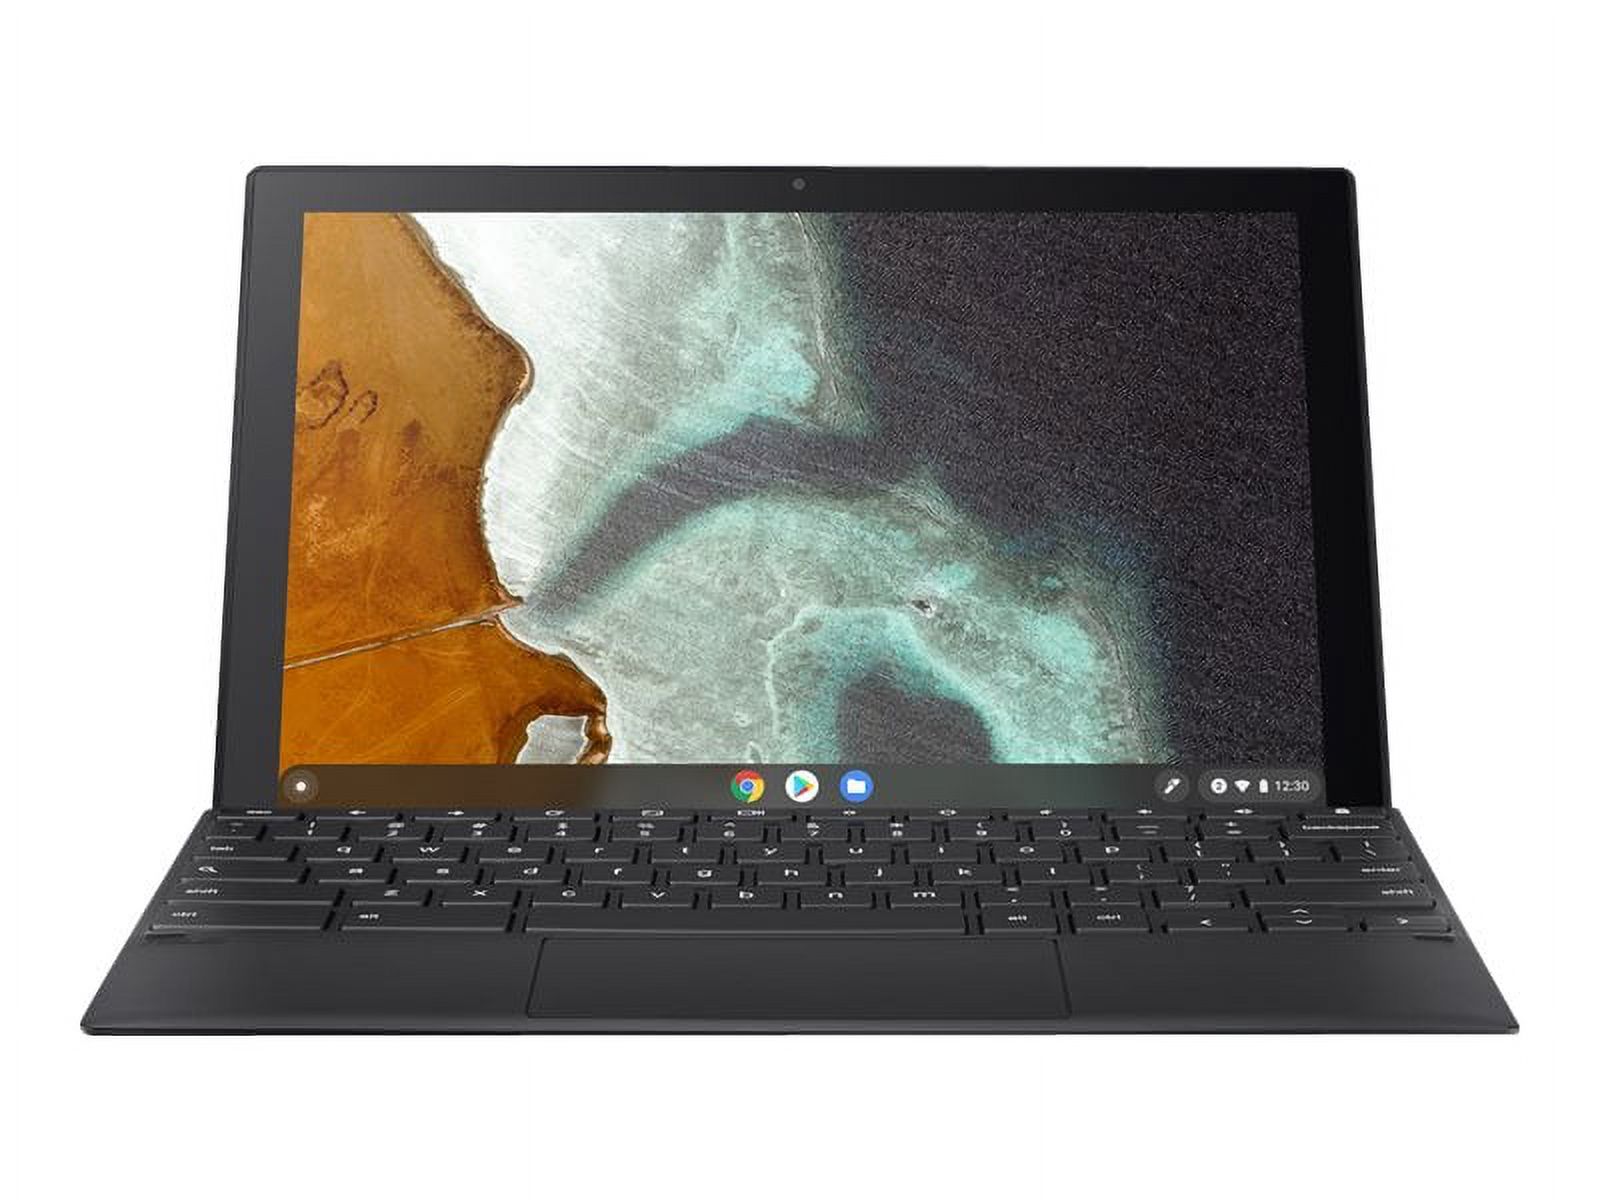 ASUS Chromebook Detachable CM3000DVA GE44T-S - With detachable keyboard - MT8183 - Chrome OS (with Chrome Enterprise Upgrade) - Mali-G72 MP3 - 4 GB RAM - 64 GB eMMC - 10.5" touchscreen 1920 x 1200 - Wi-Fi 5 - mineral gray - image 5 of 16